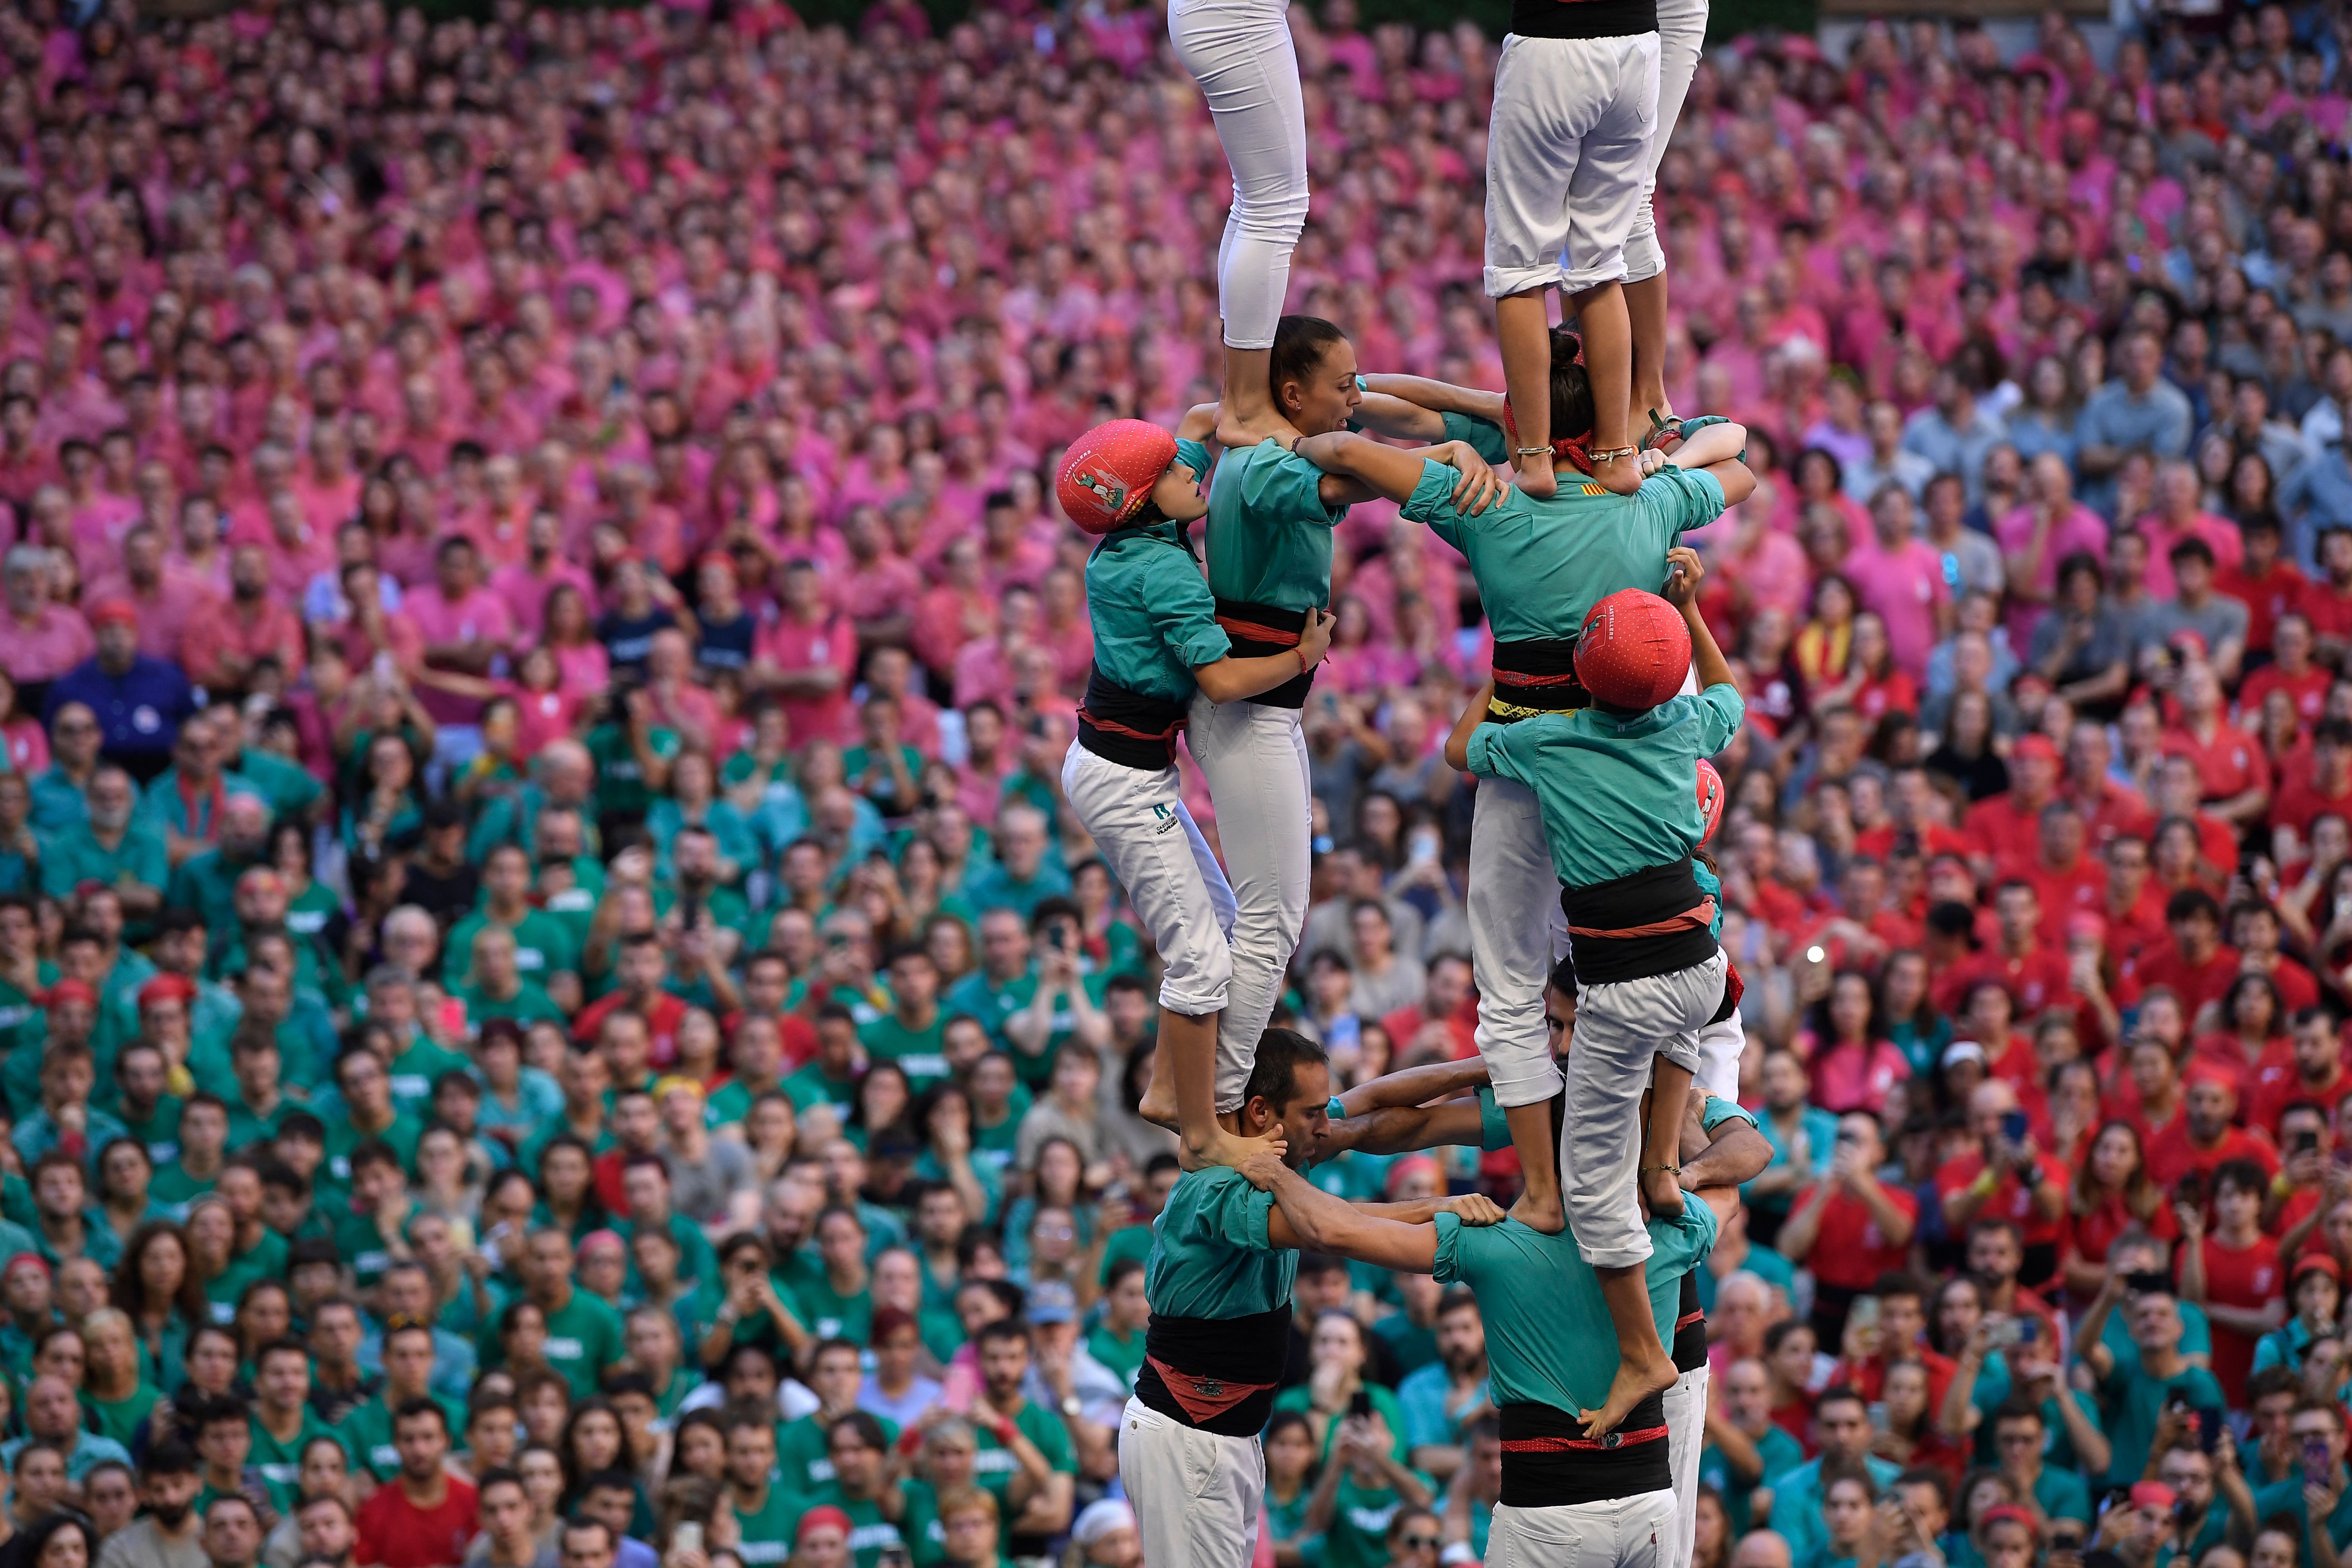 A human tower.